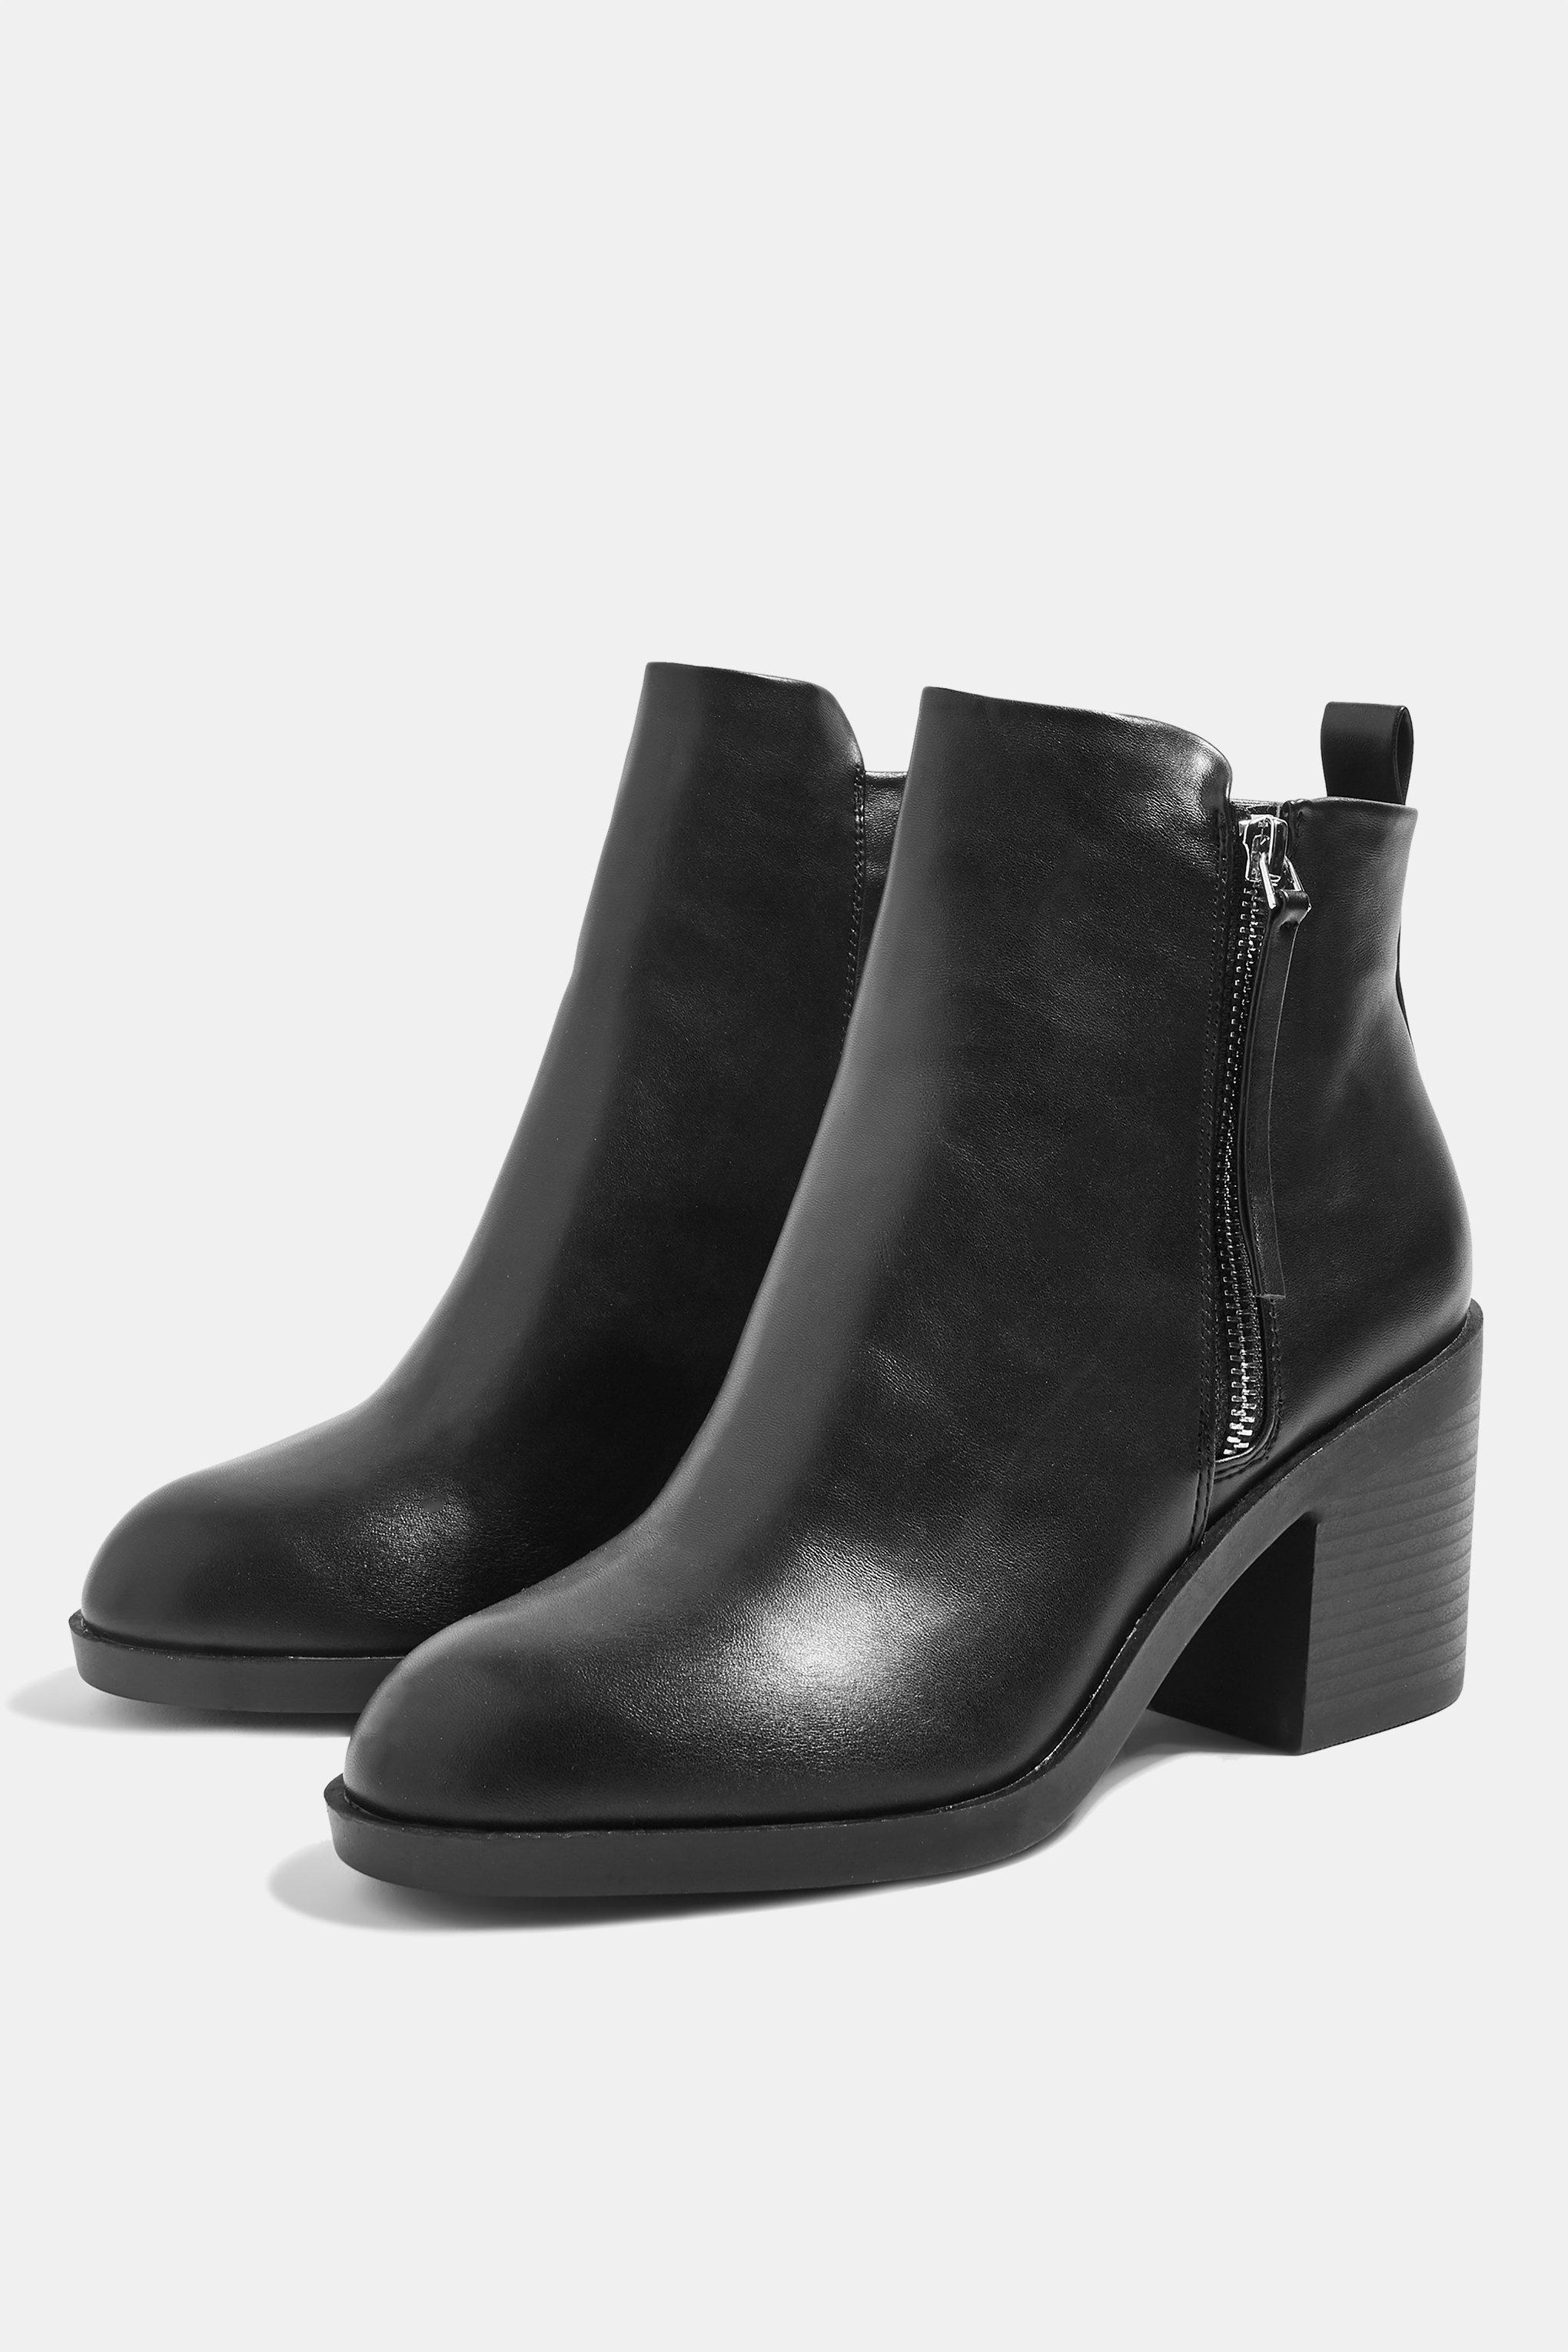 TOPSHOP Brittney Ankle Boots in Black - Lyst